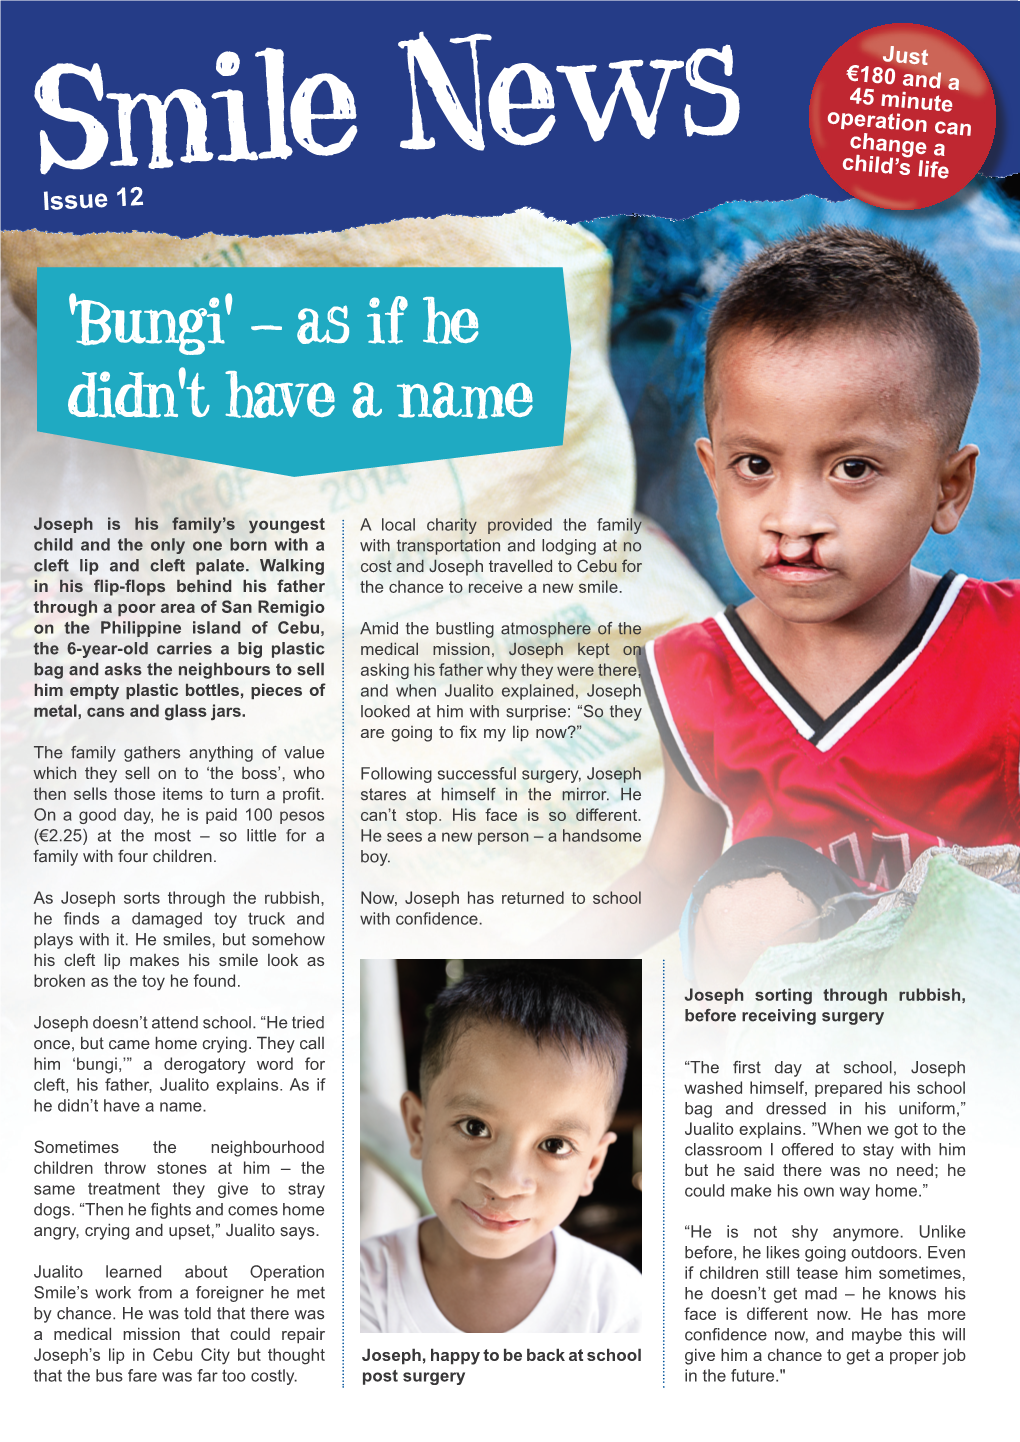 Bungi' – As If He Didn't Have a Name